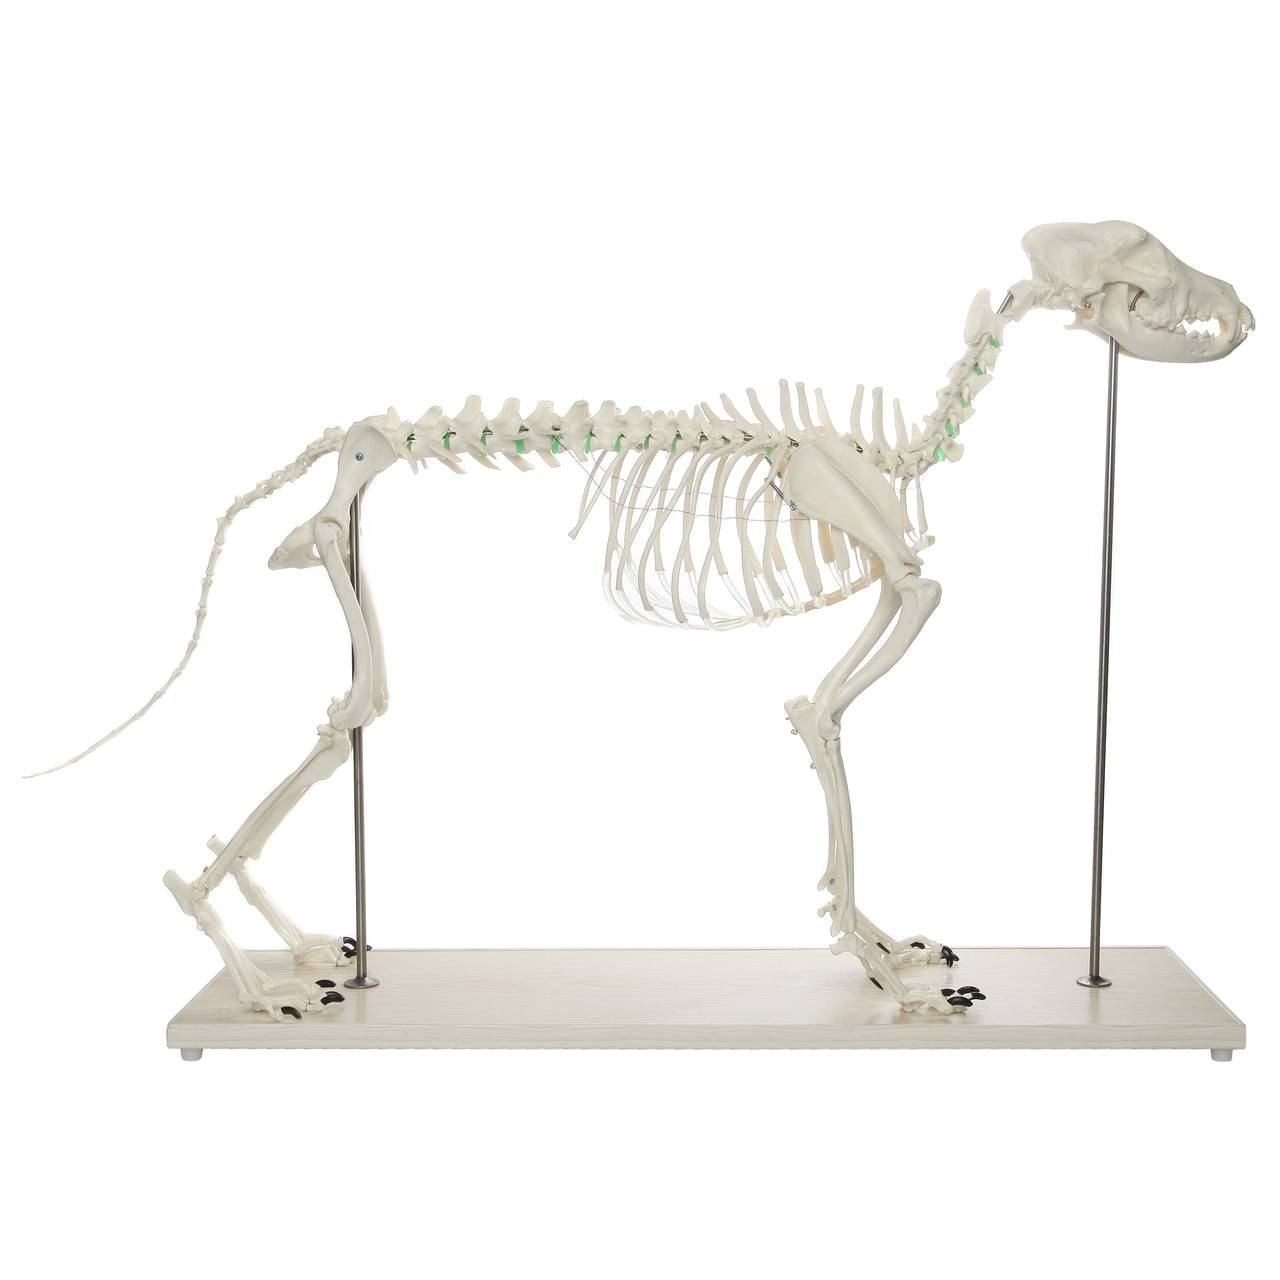 Axis Scientific Large Canine - Flexible Articulation on Base